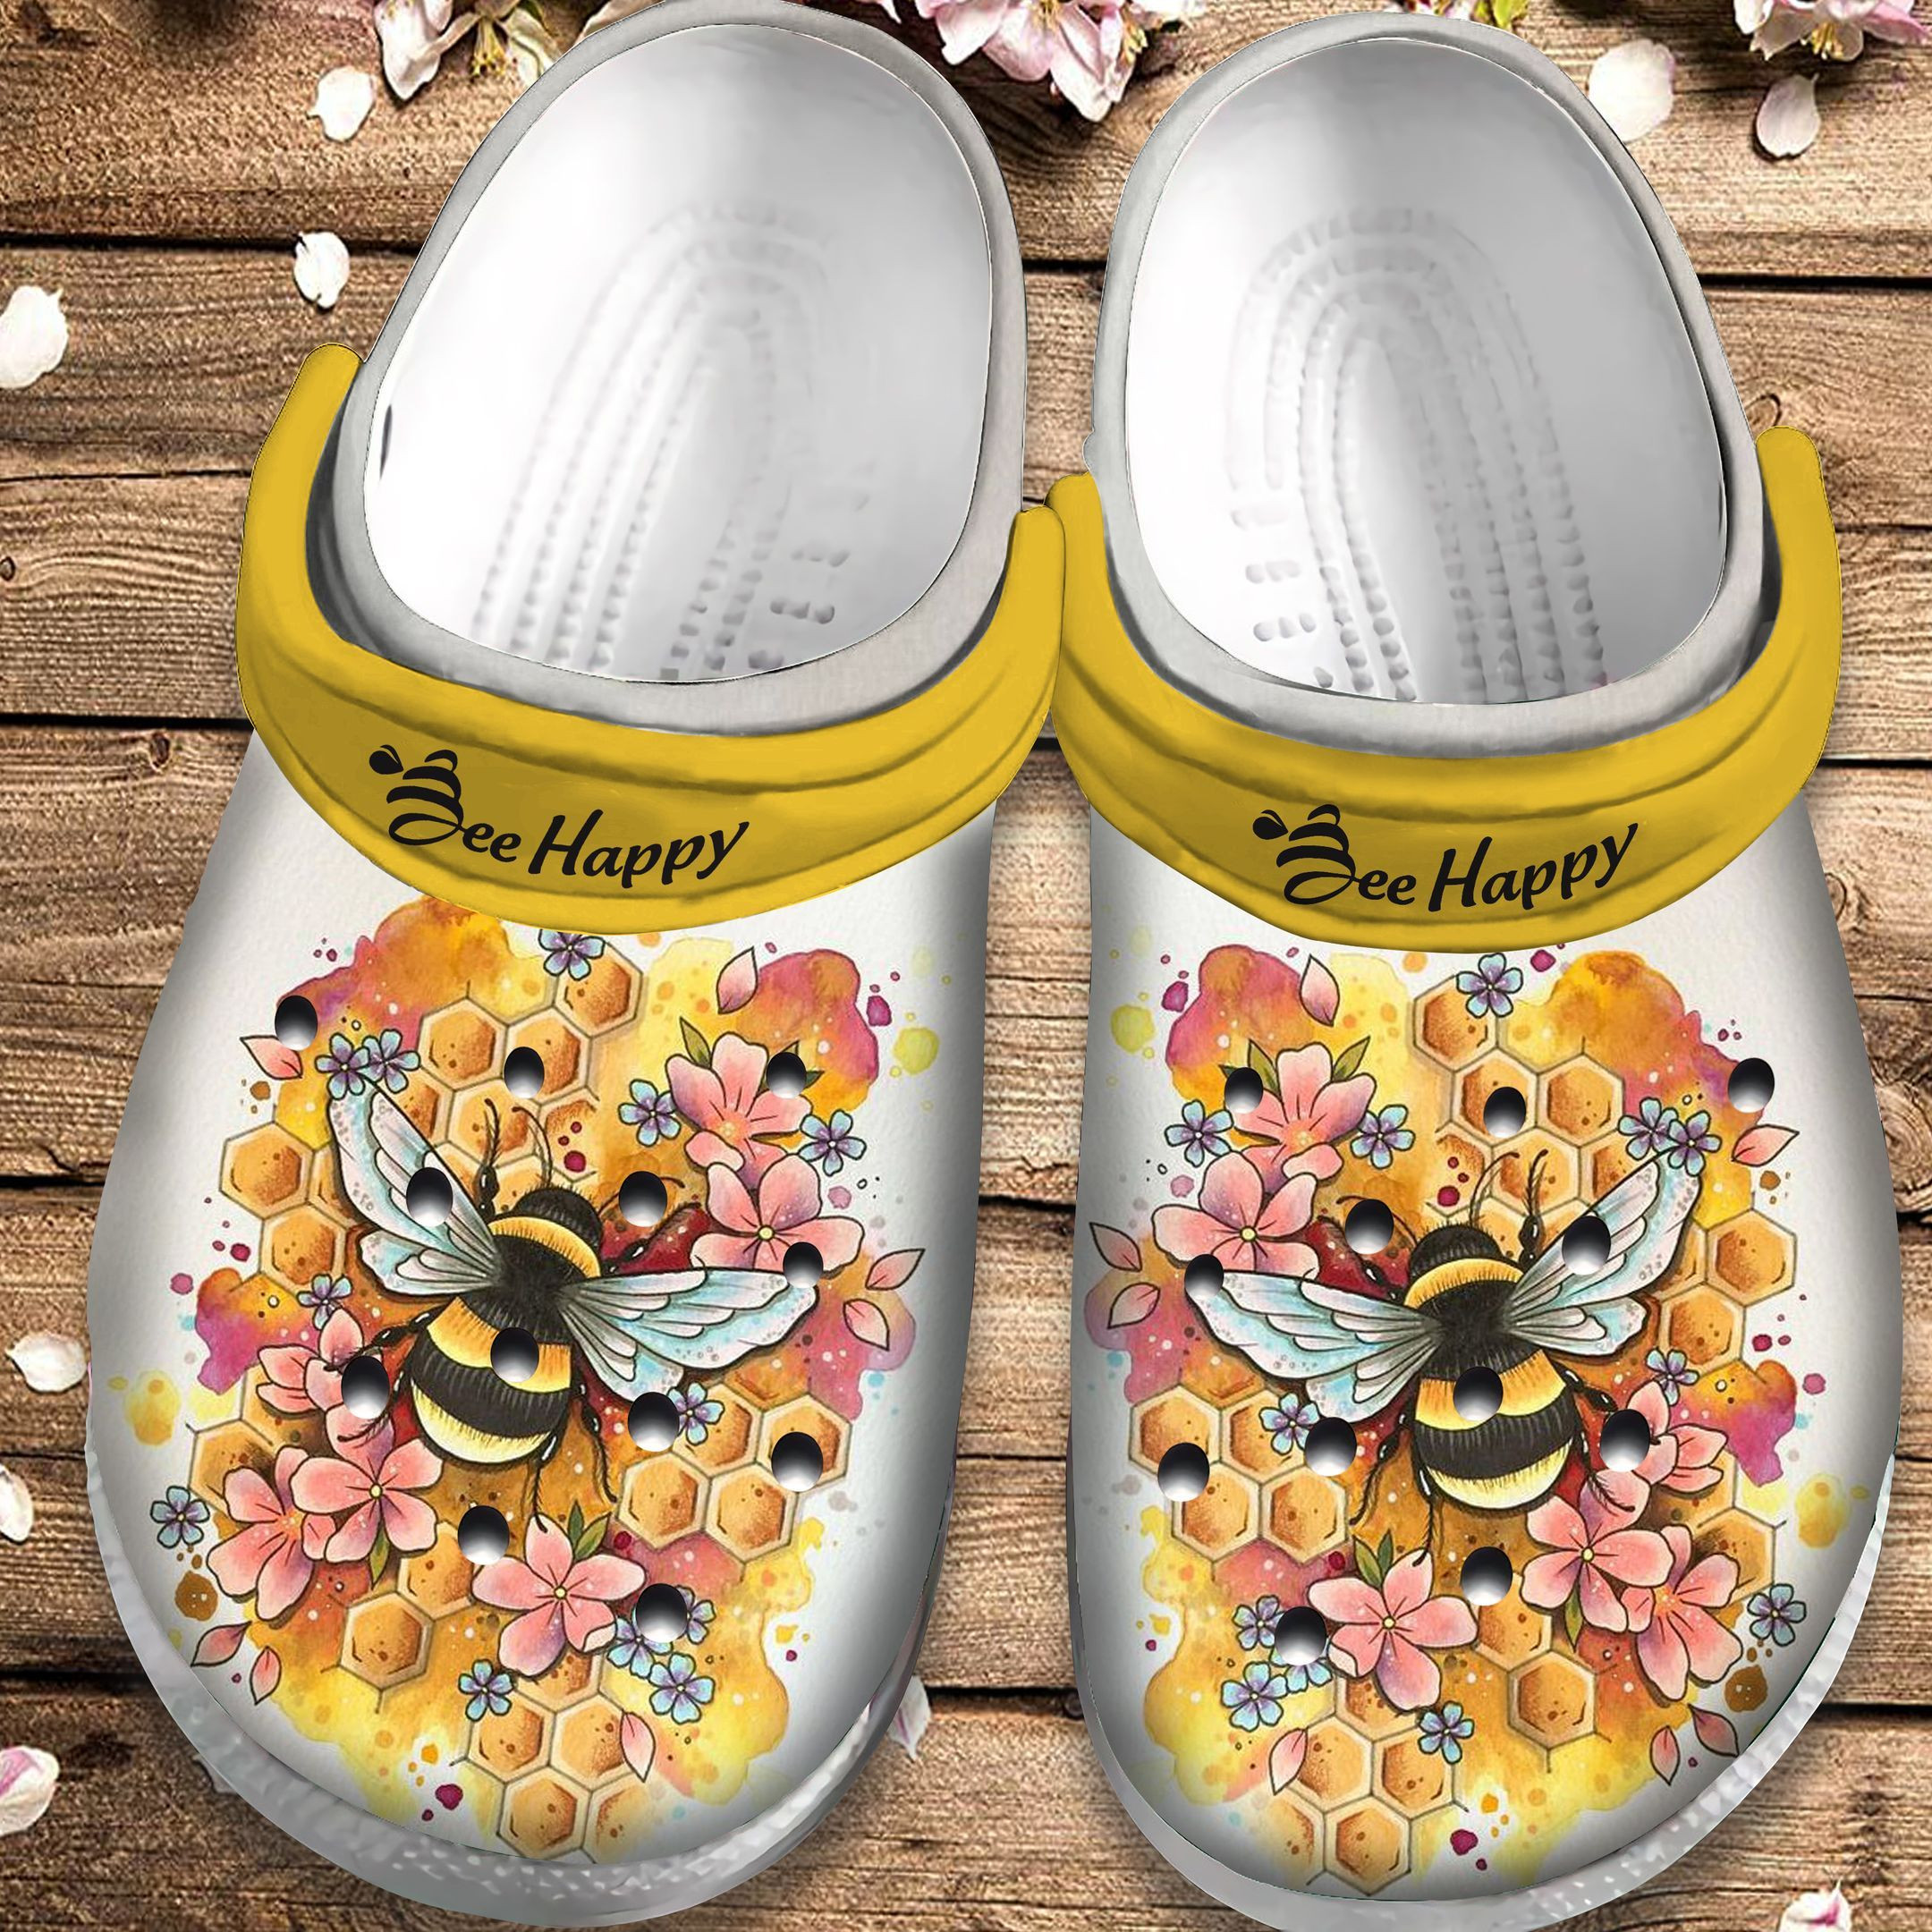 Bee Happy Shoes Flower Honey Crocs Crocbland Clog Gift For Woman Girl Mother Daughter